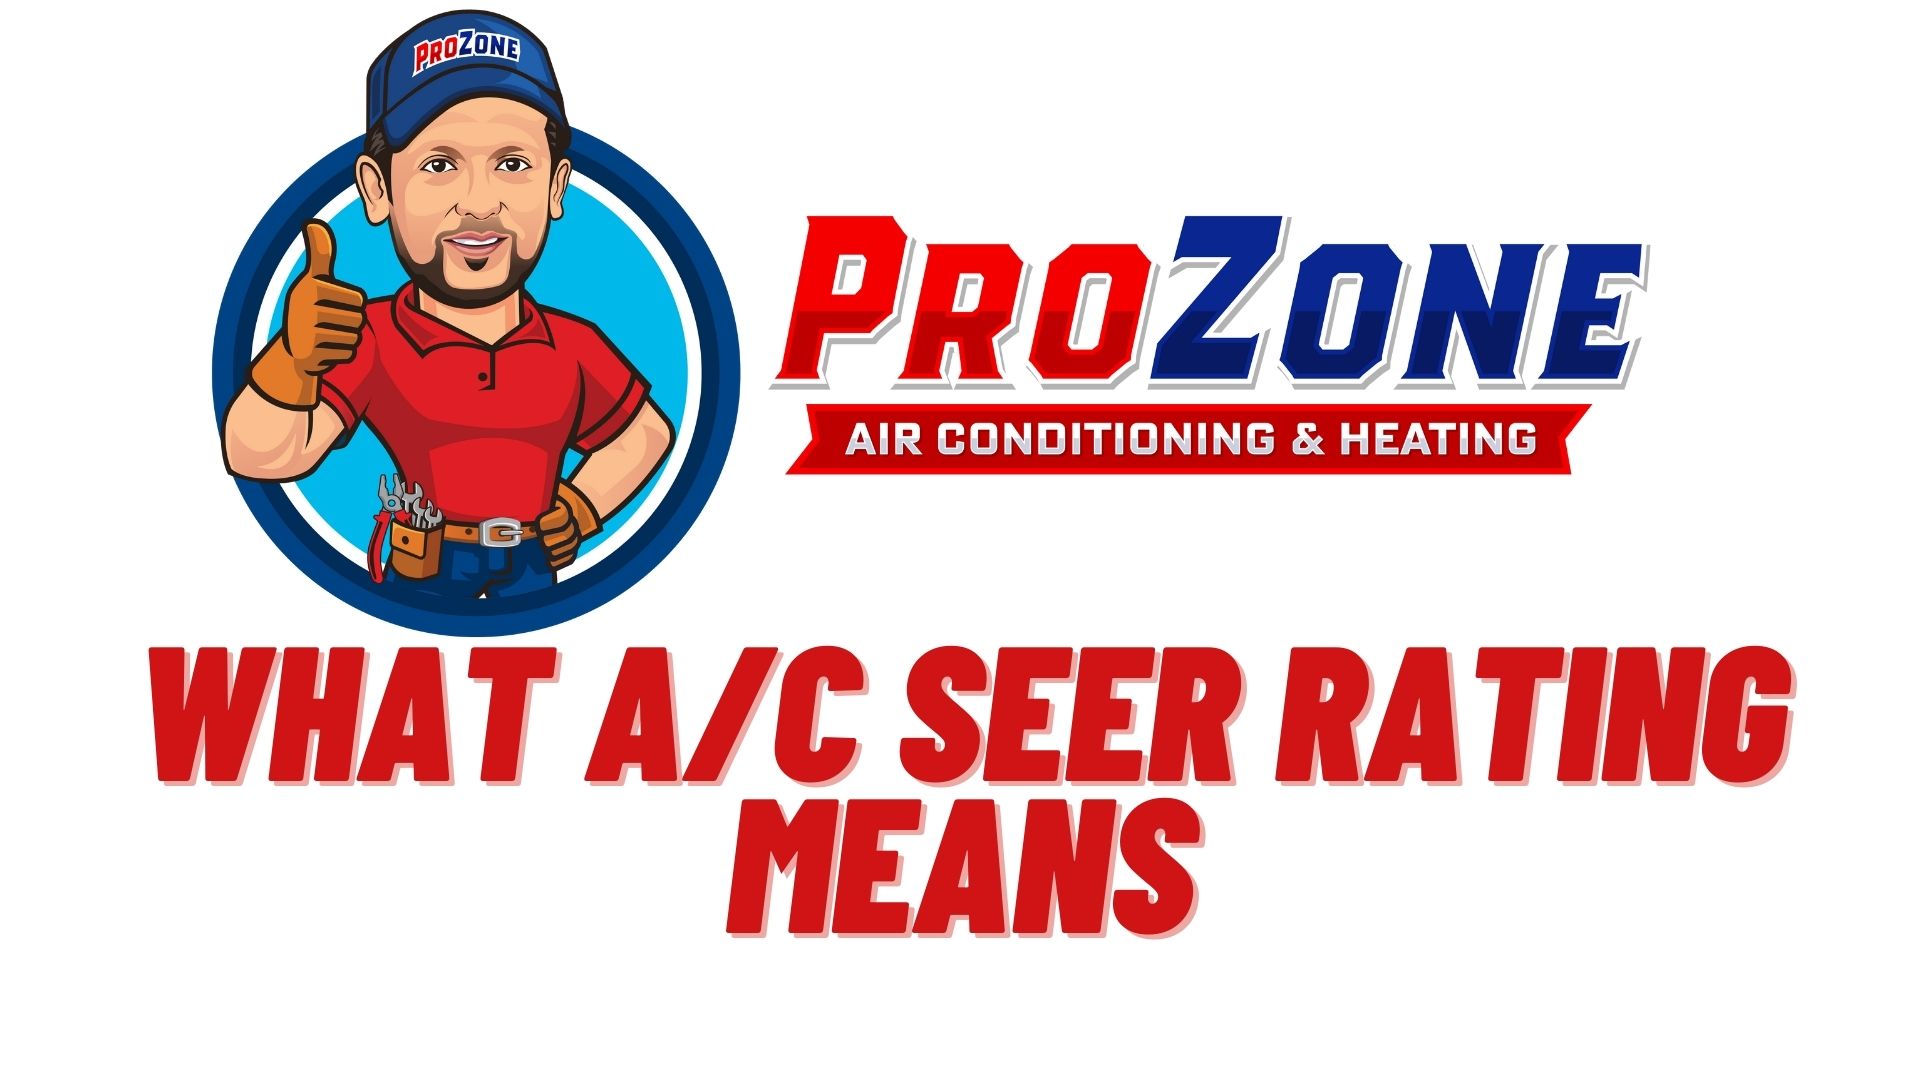 WHAT A/C SEER RATING MEANS